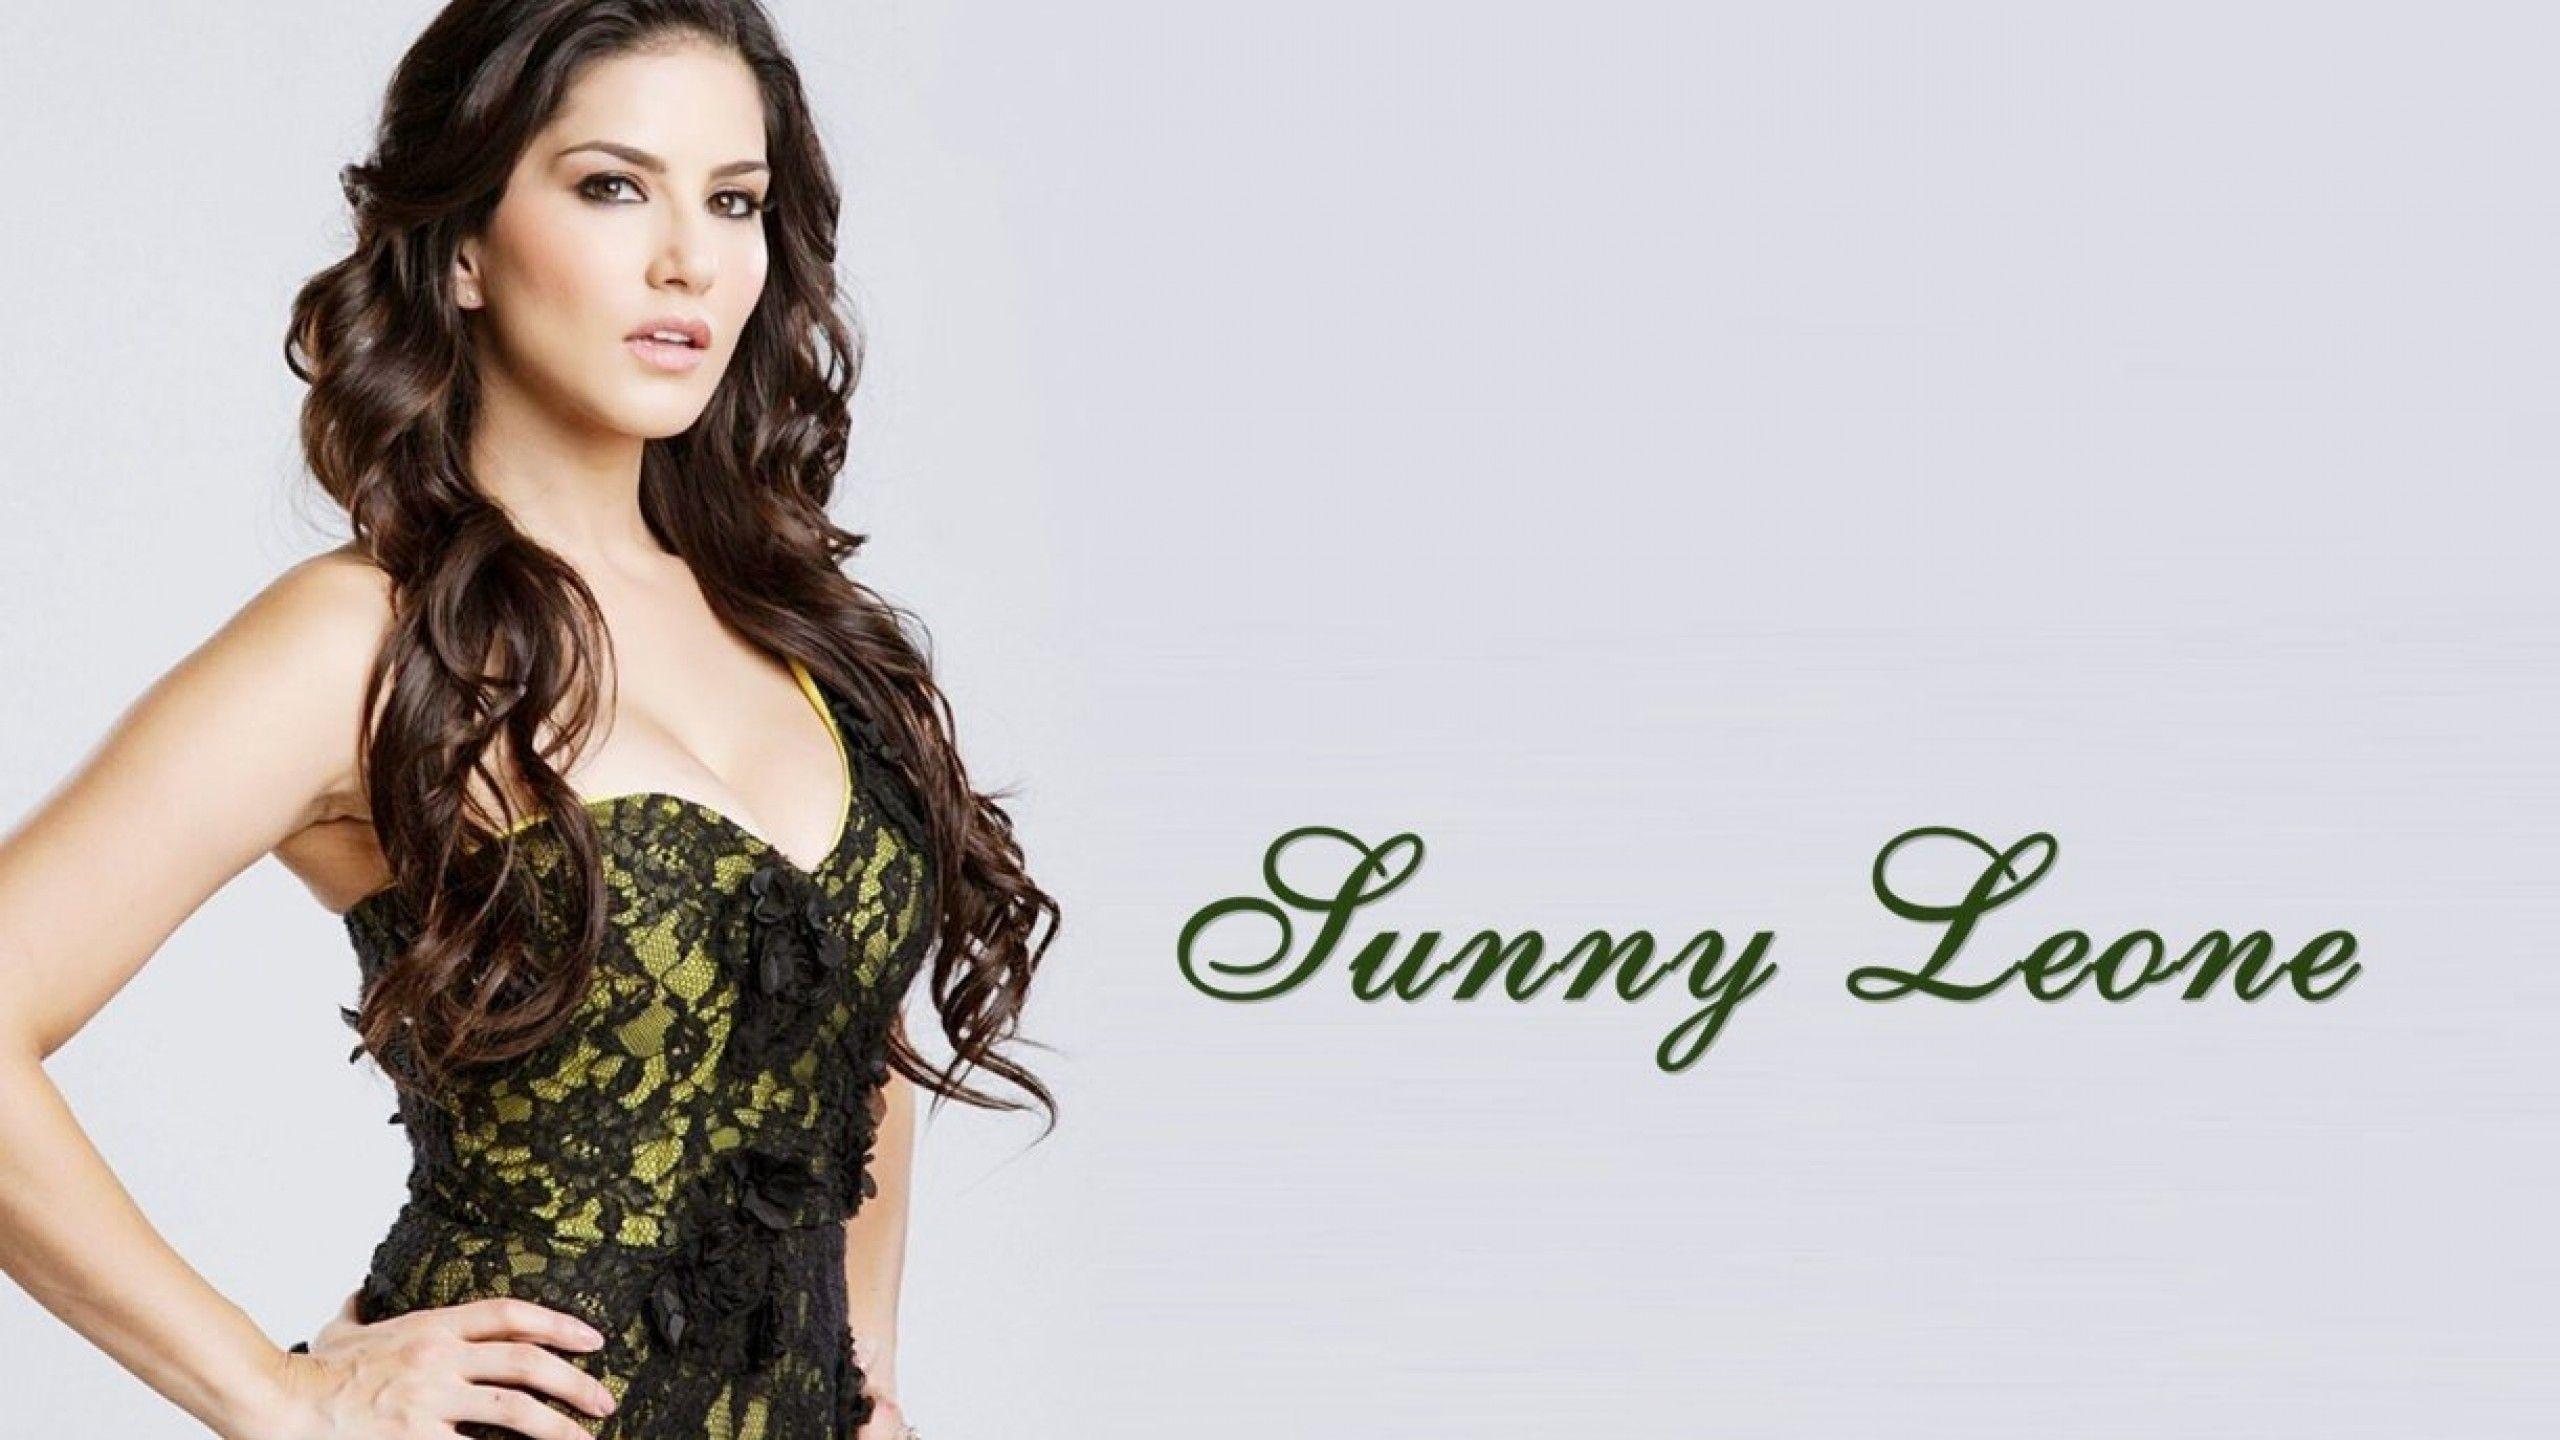 Wallpaper.wiki Download Free Sunny Leone Background 1 PIC WPD00754